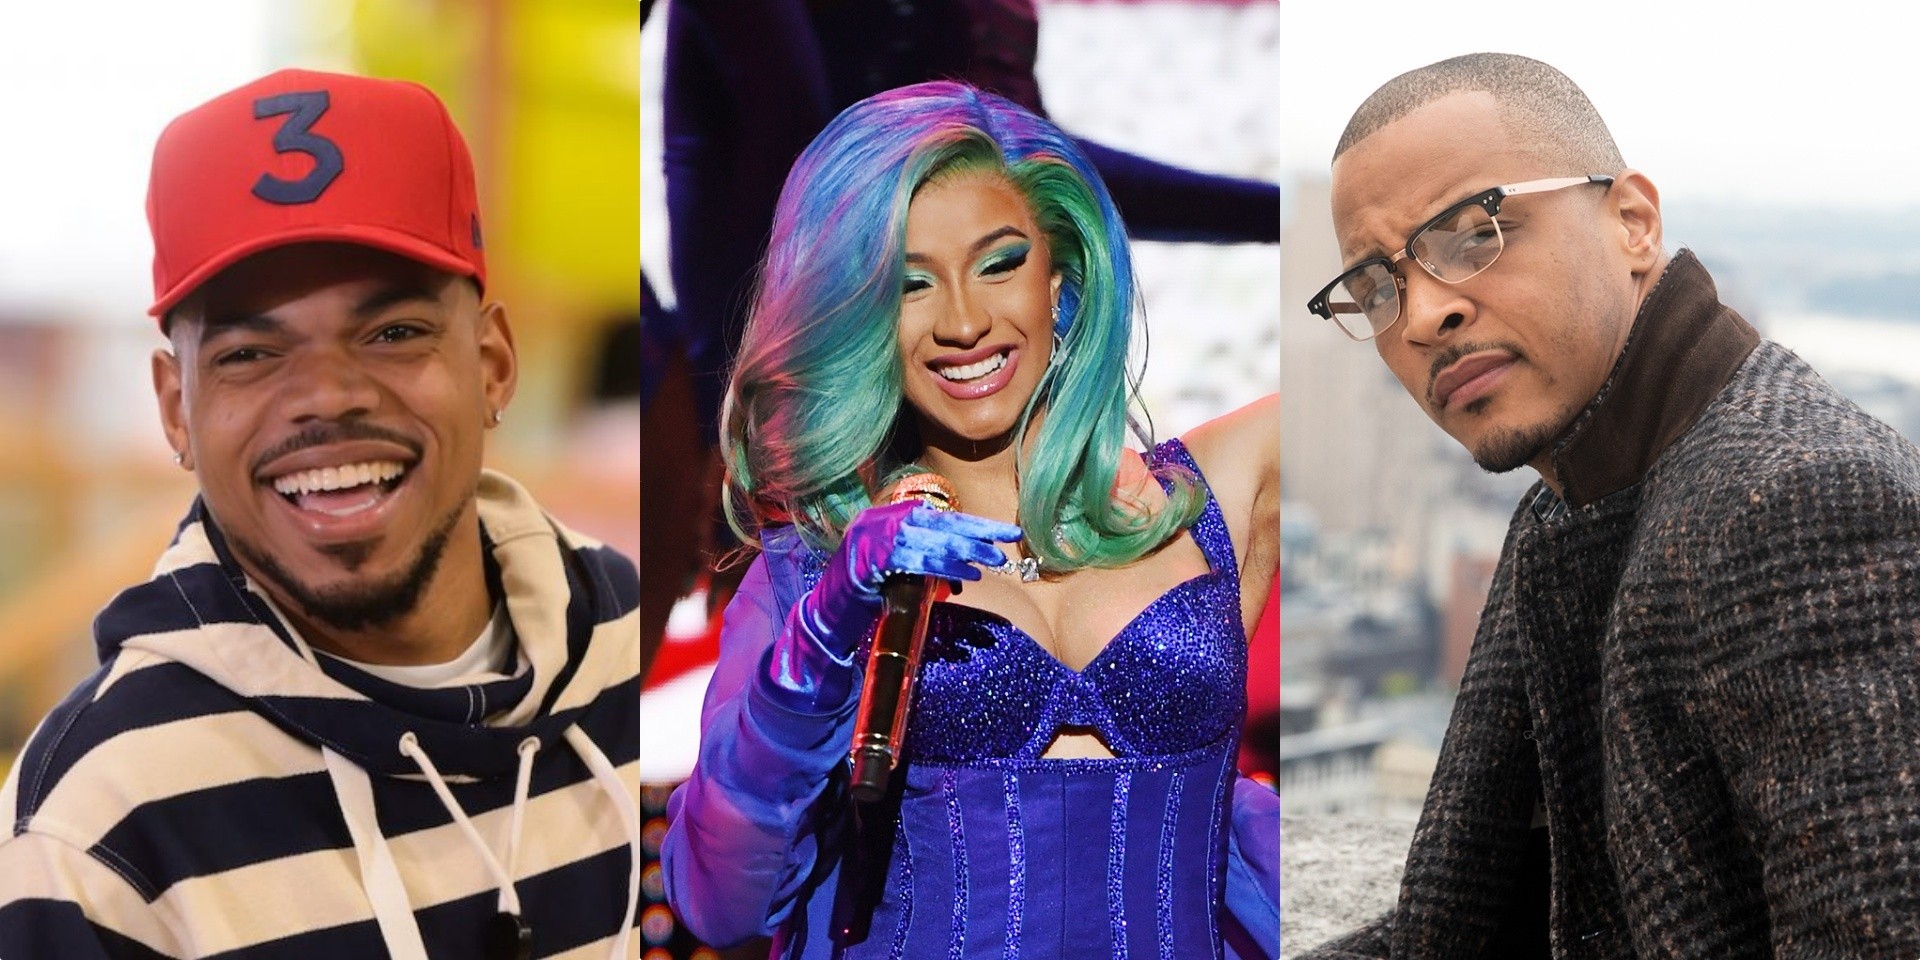 Catch Cardi B, Chance the Rapper, and T.I. in the trailer for Netflix’s new hip-hop competition show, Rhythm x Flow